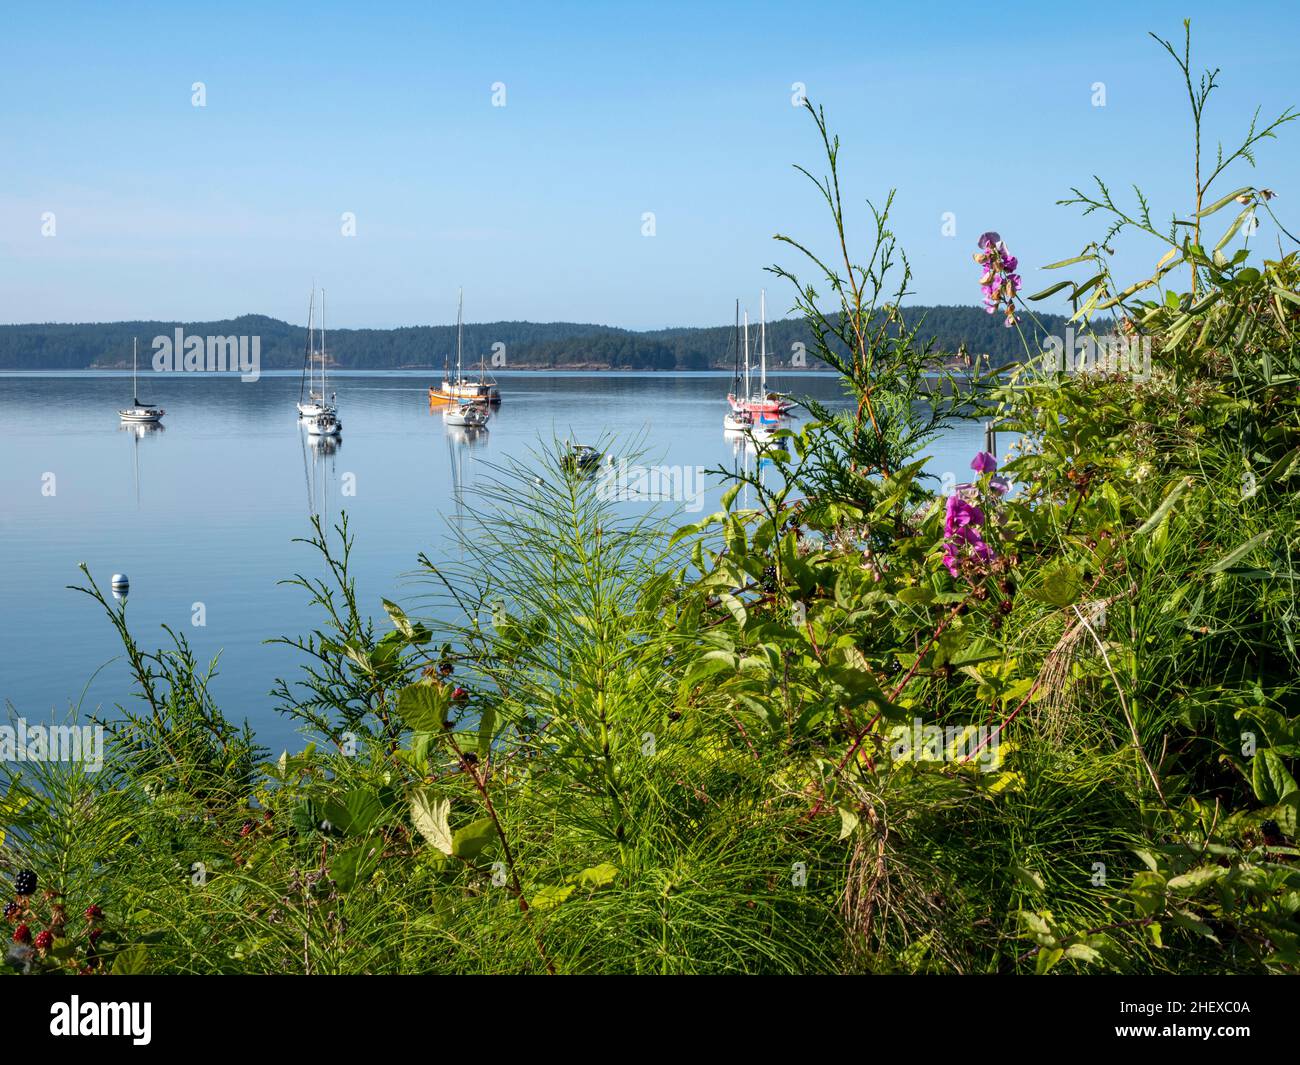 WA21090-00...WASHINGTON - View of boats moored offshore in West Sound at Orcas Island. Stock Photo